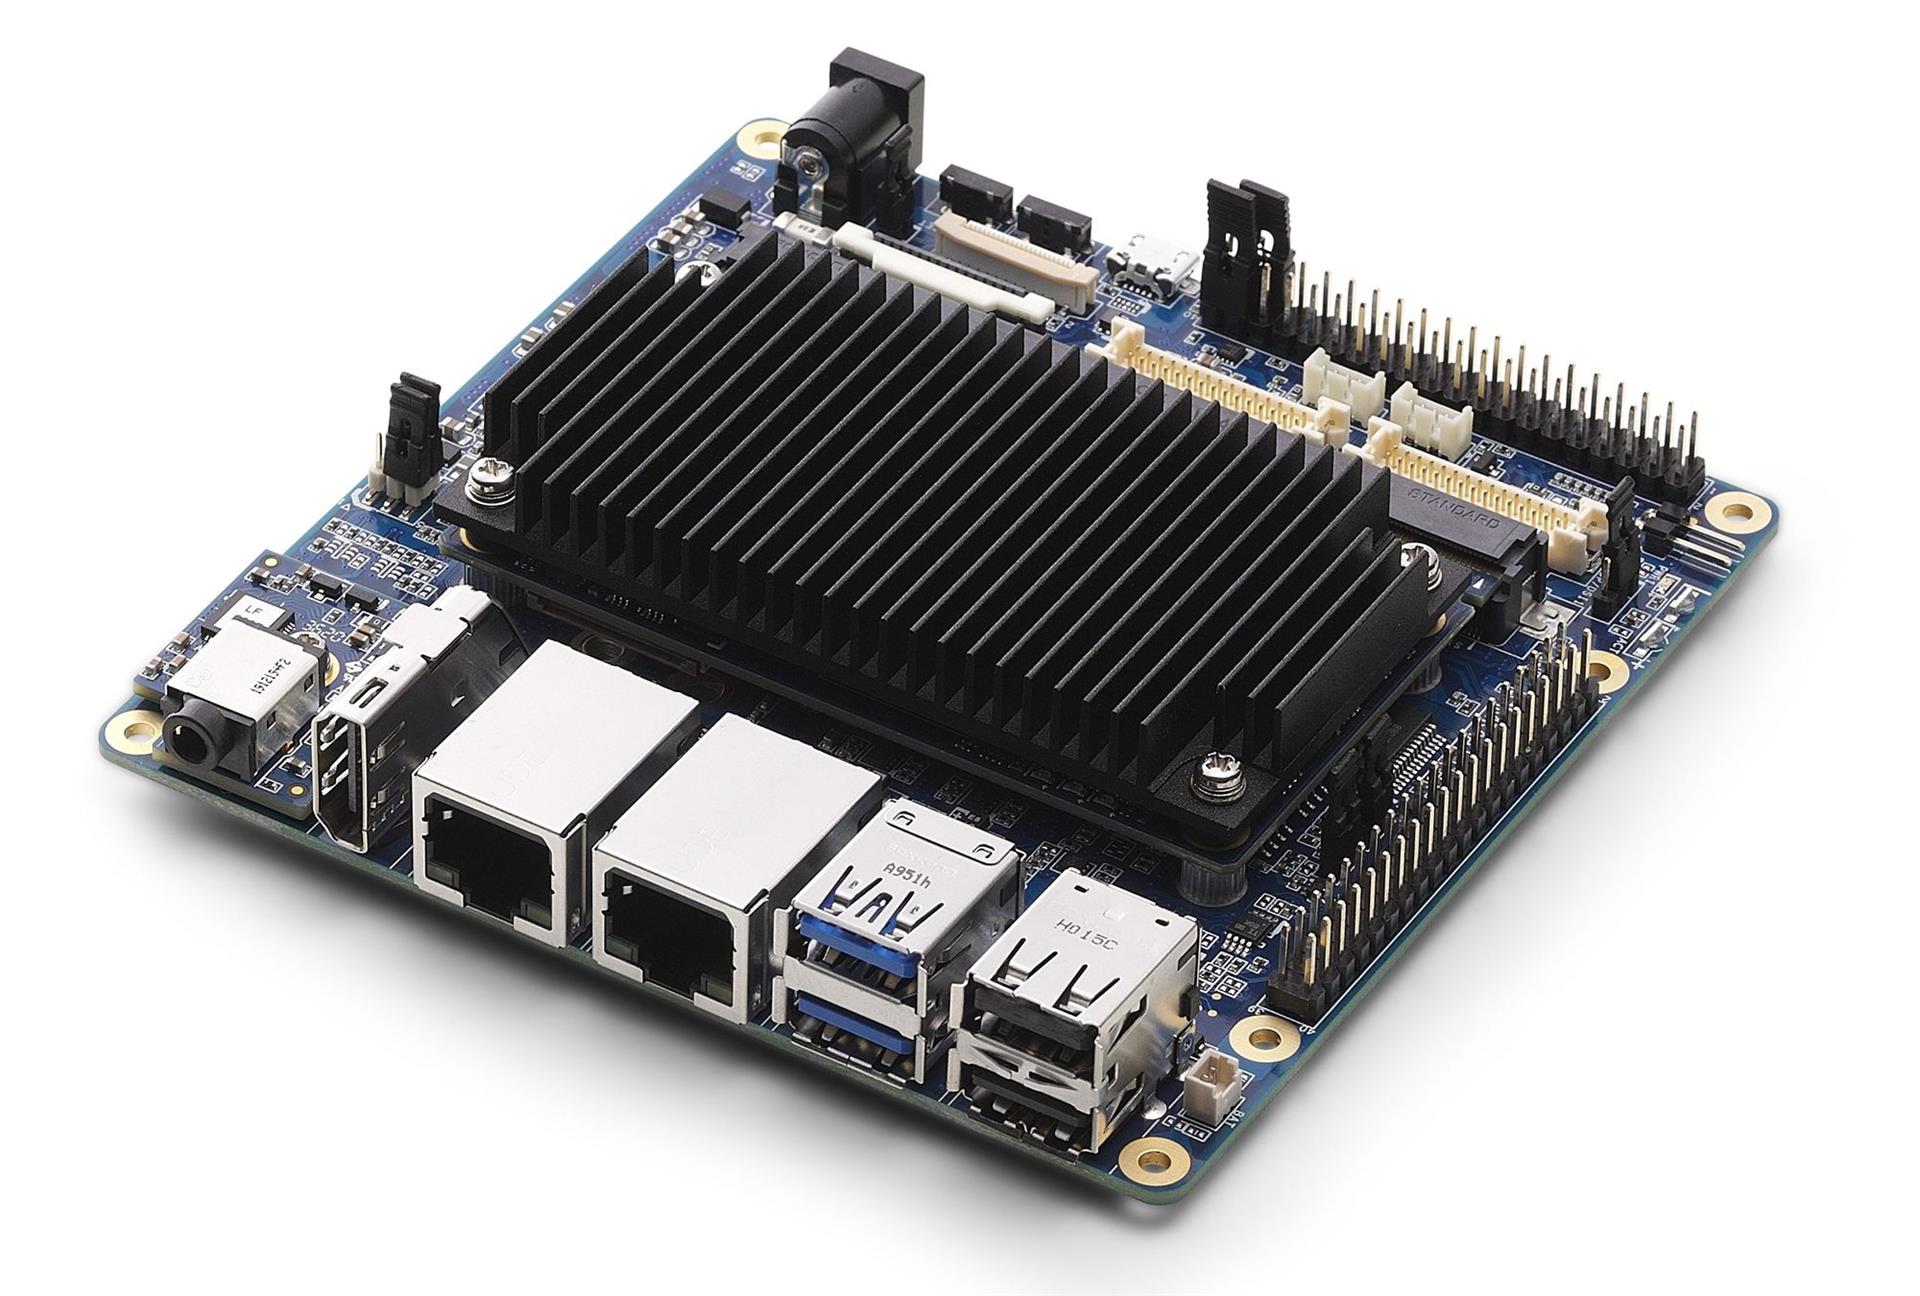 <br />Figure 2. The I-Pi SMARC Plus prototyping platform combines the flexibility of Raspberry Pi or Arduino with the robustness of an industrial-grade computer-on-module (COM).